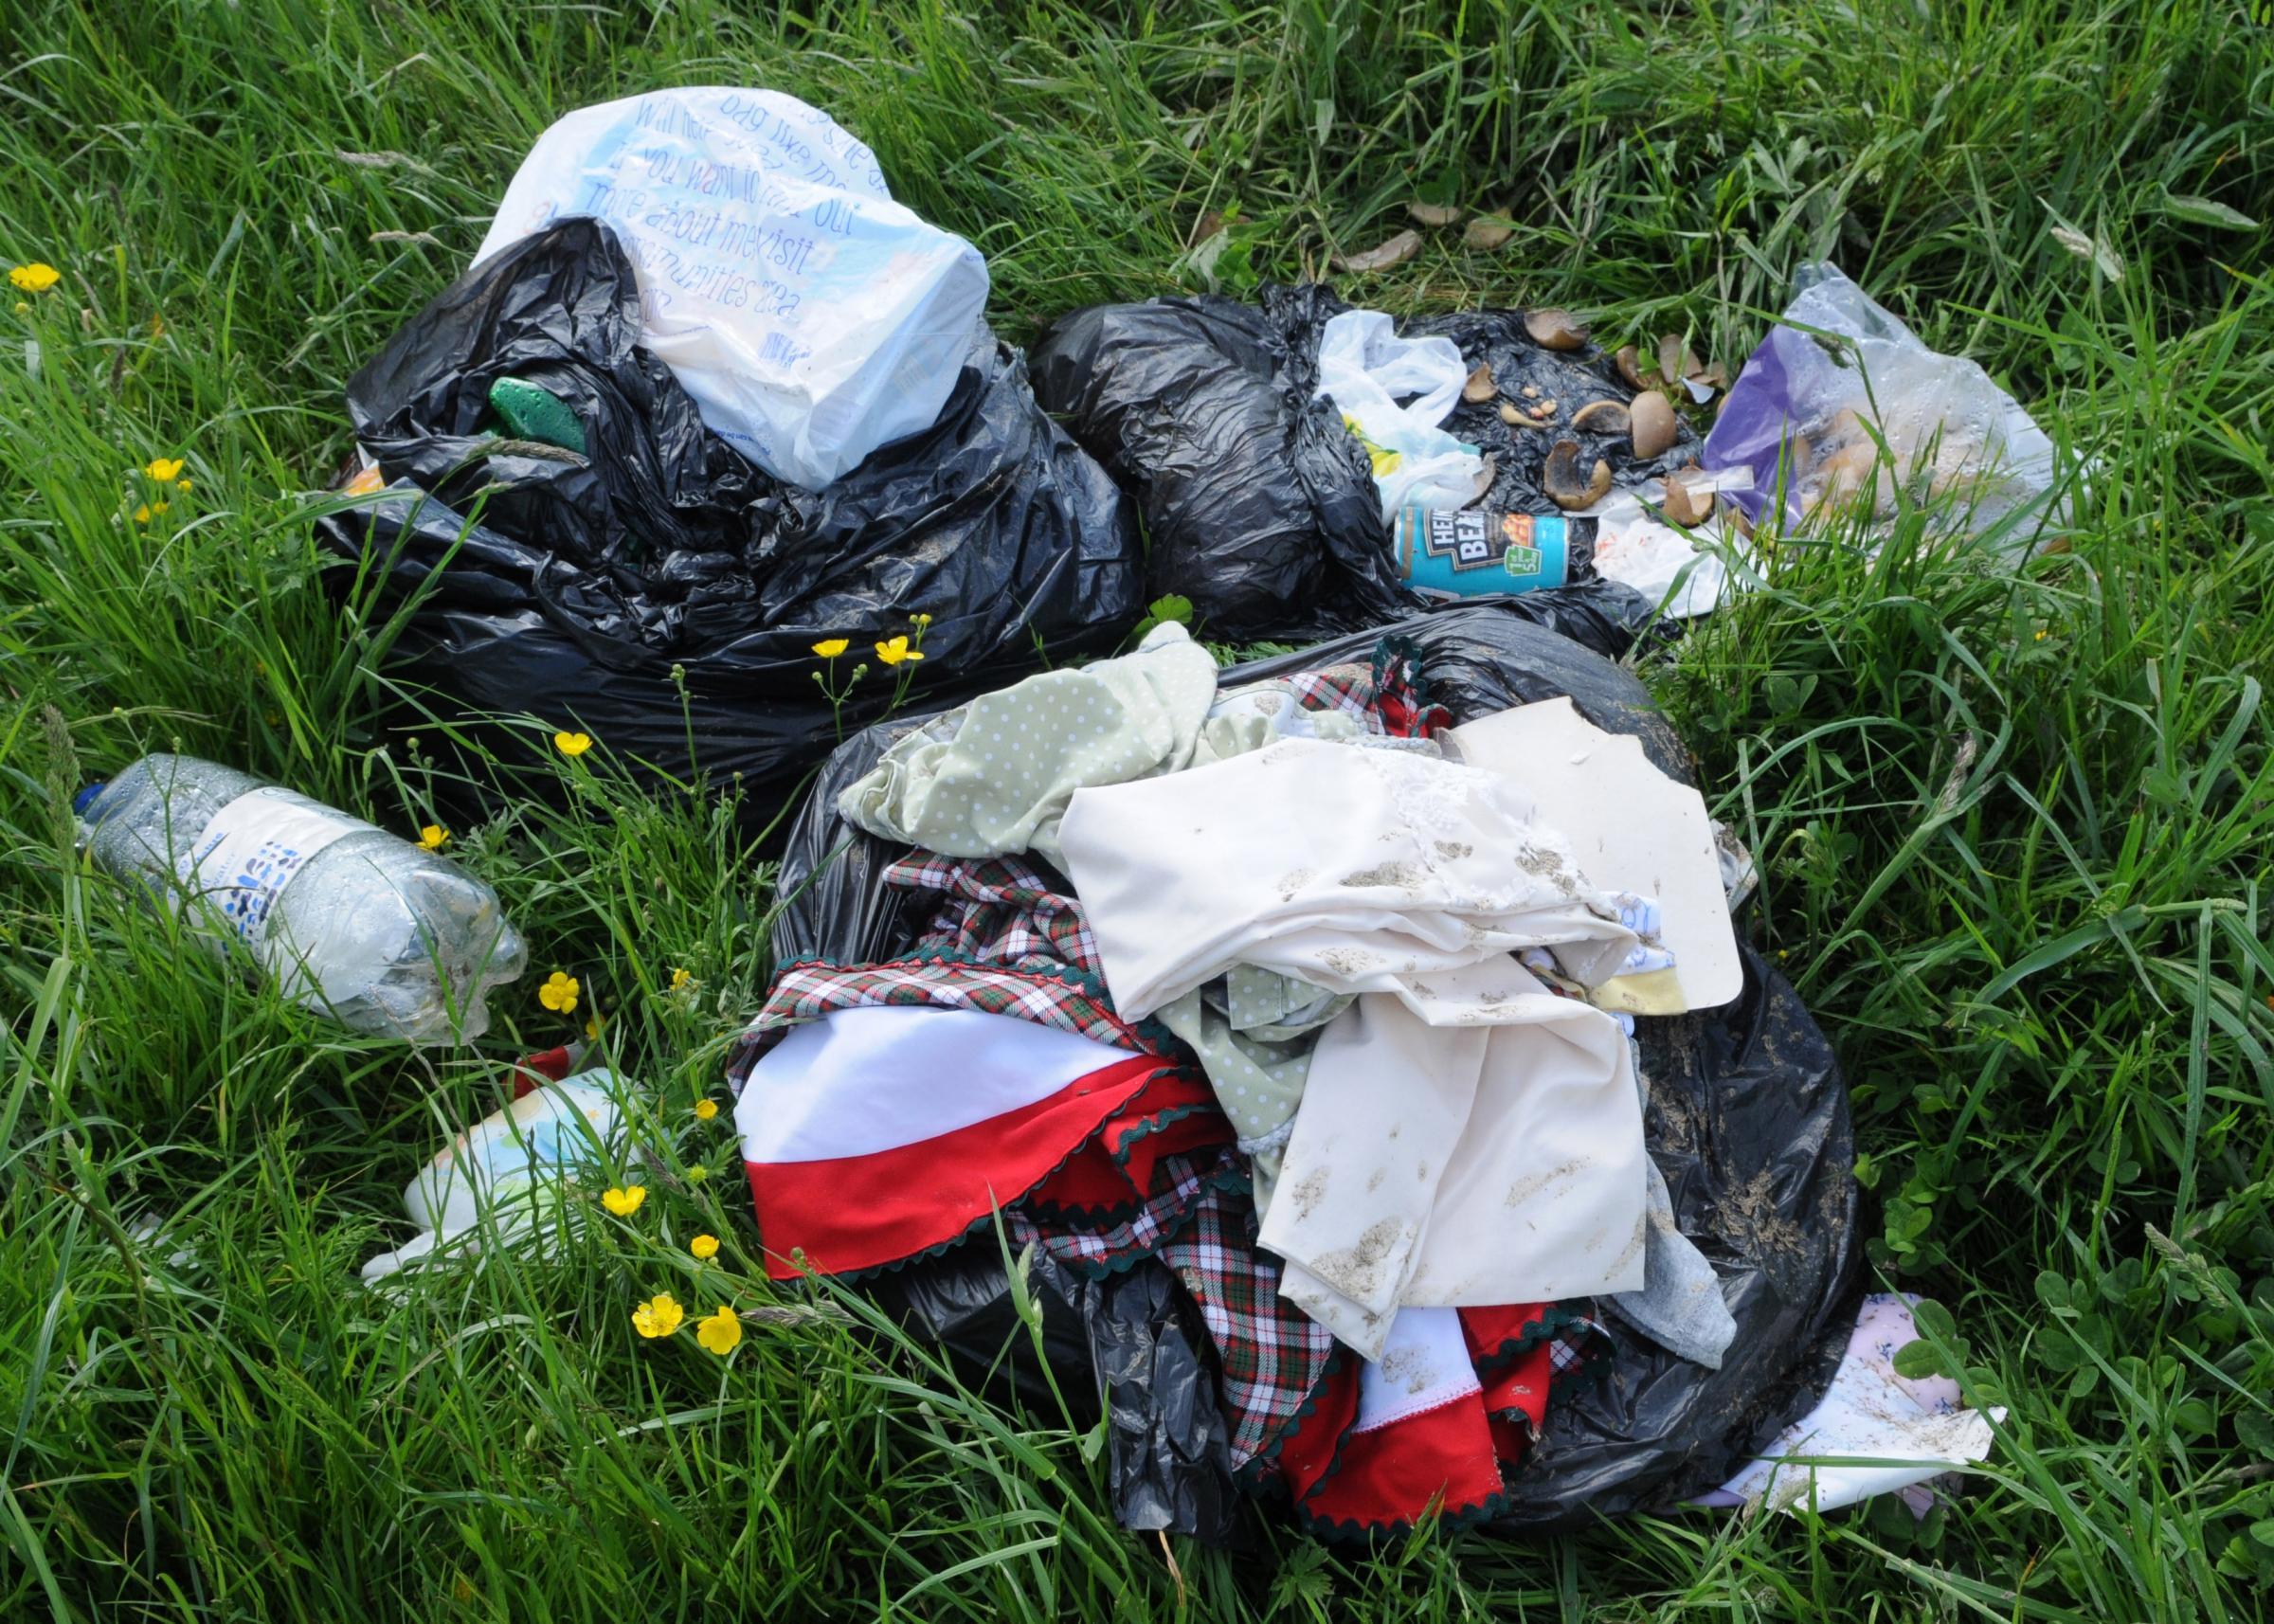 REVEALED: The London boroughs that are best and worst at recycling household rubbish